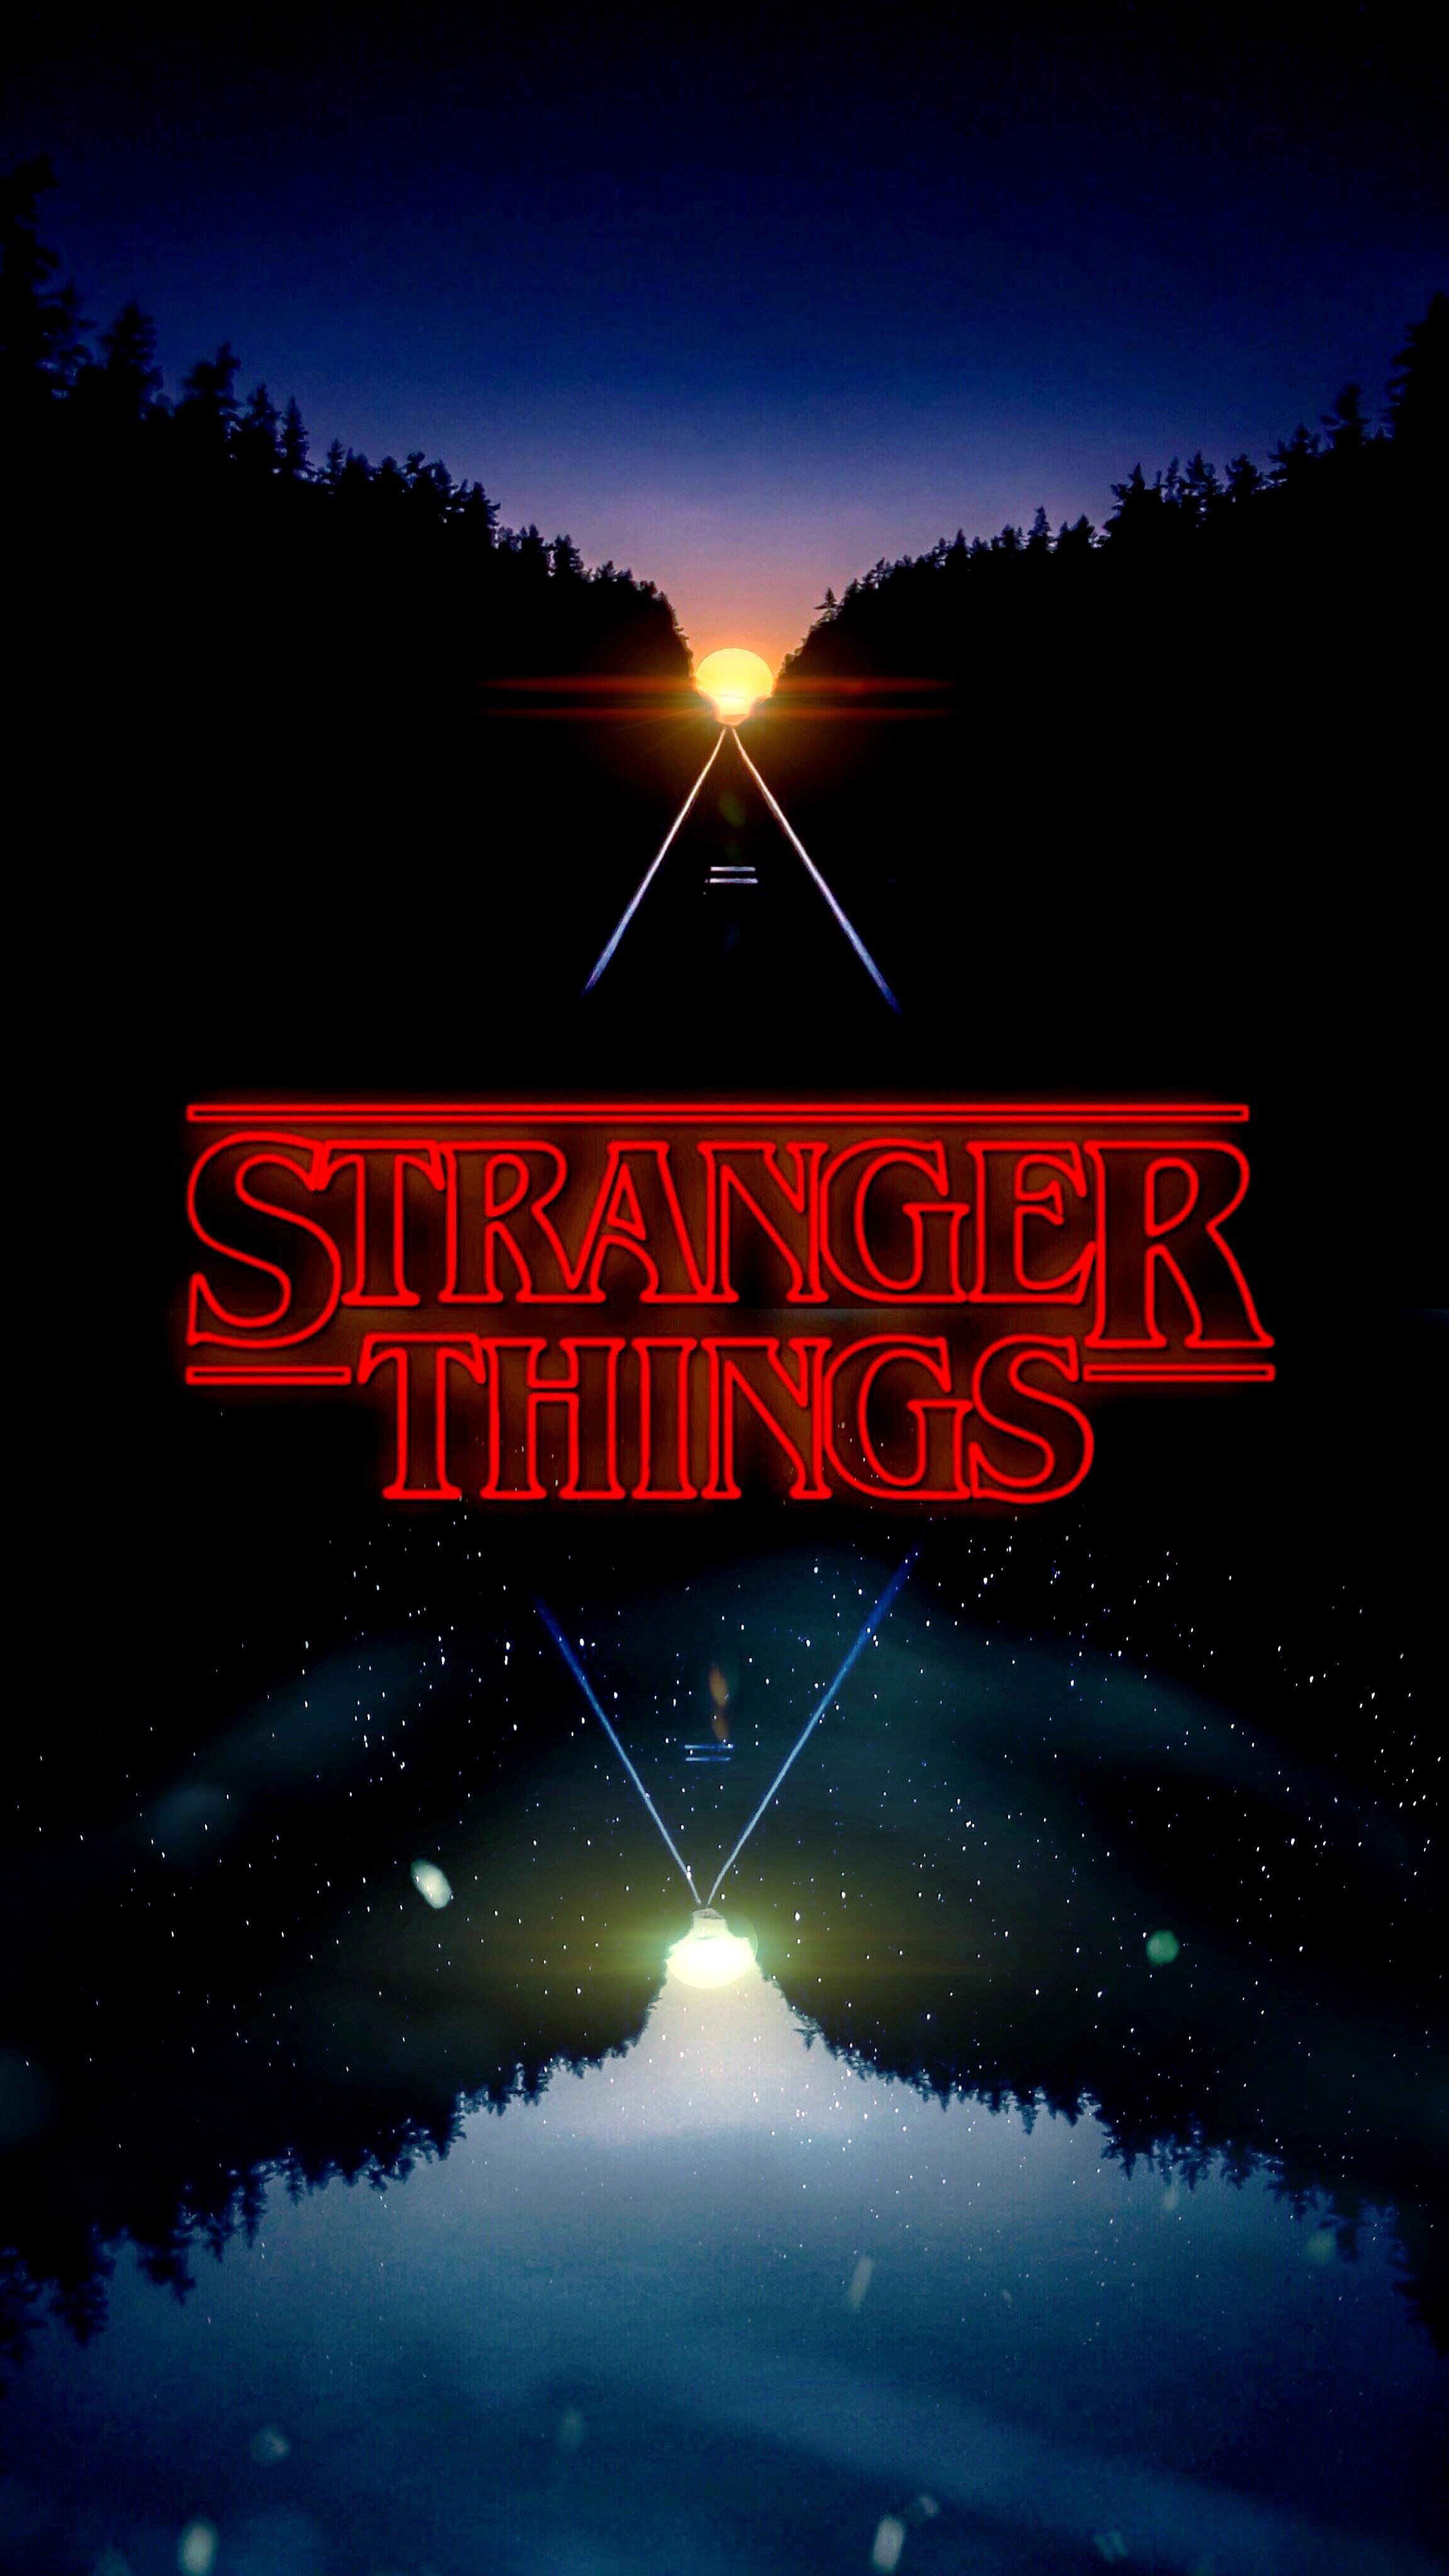 Sharing a Stranger Things iPhone wallpaper I designed and created